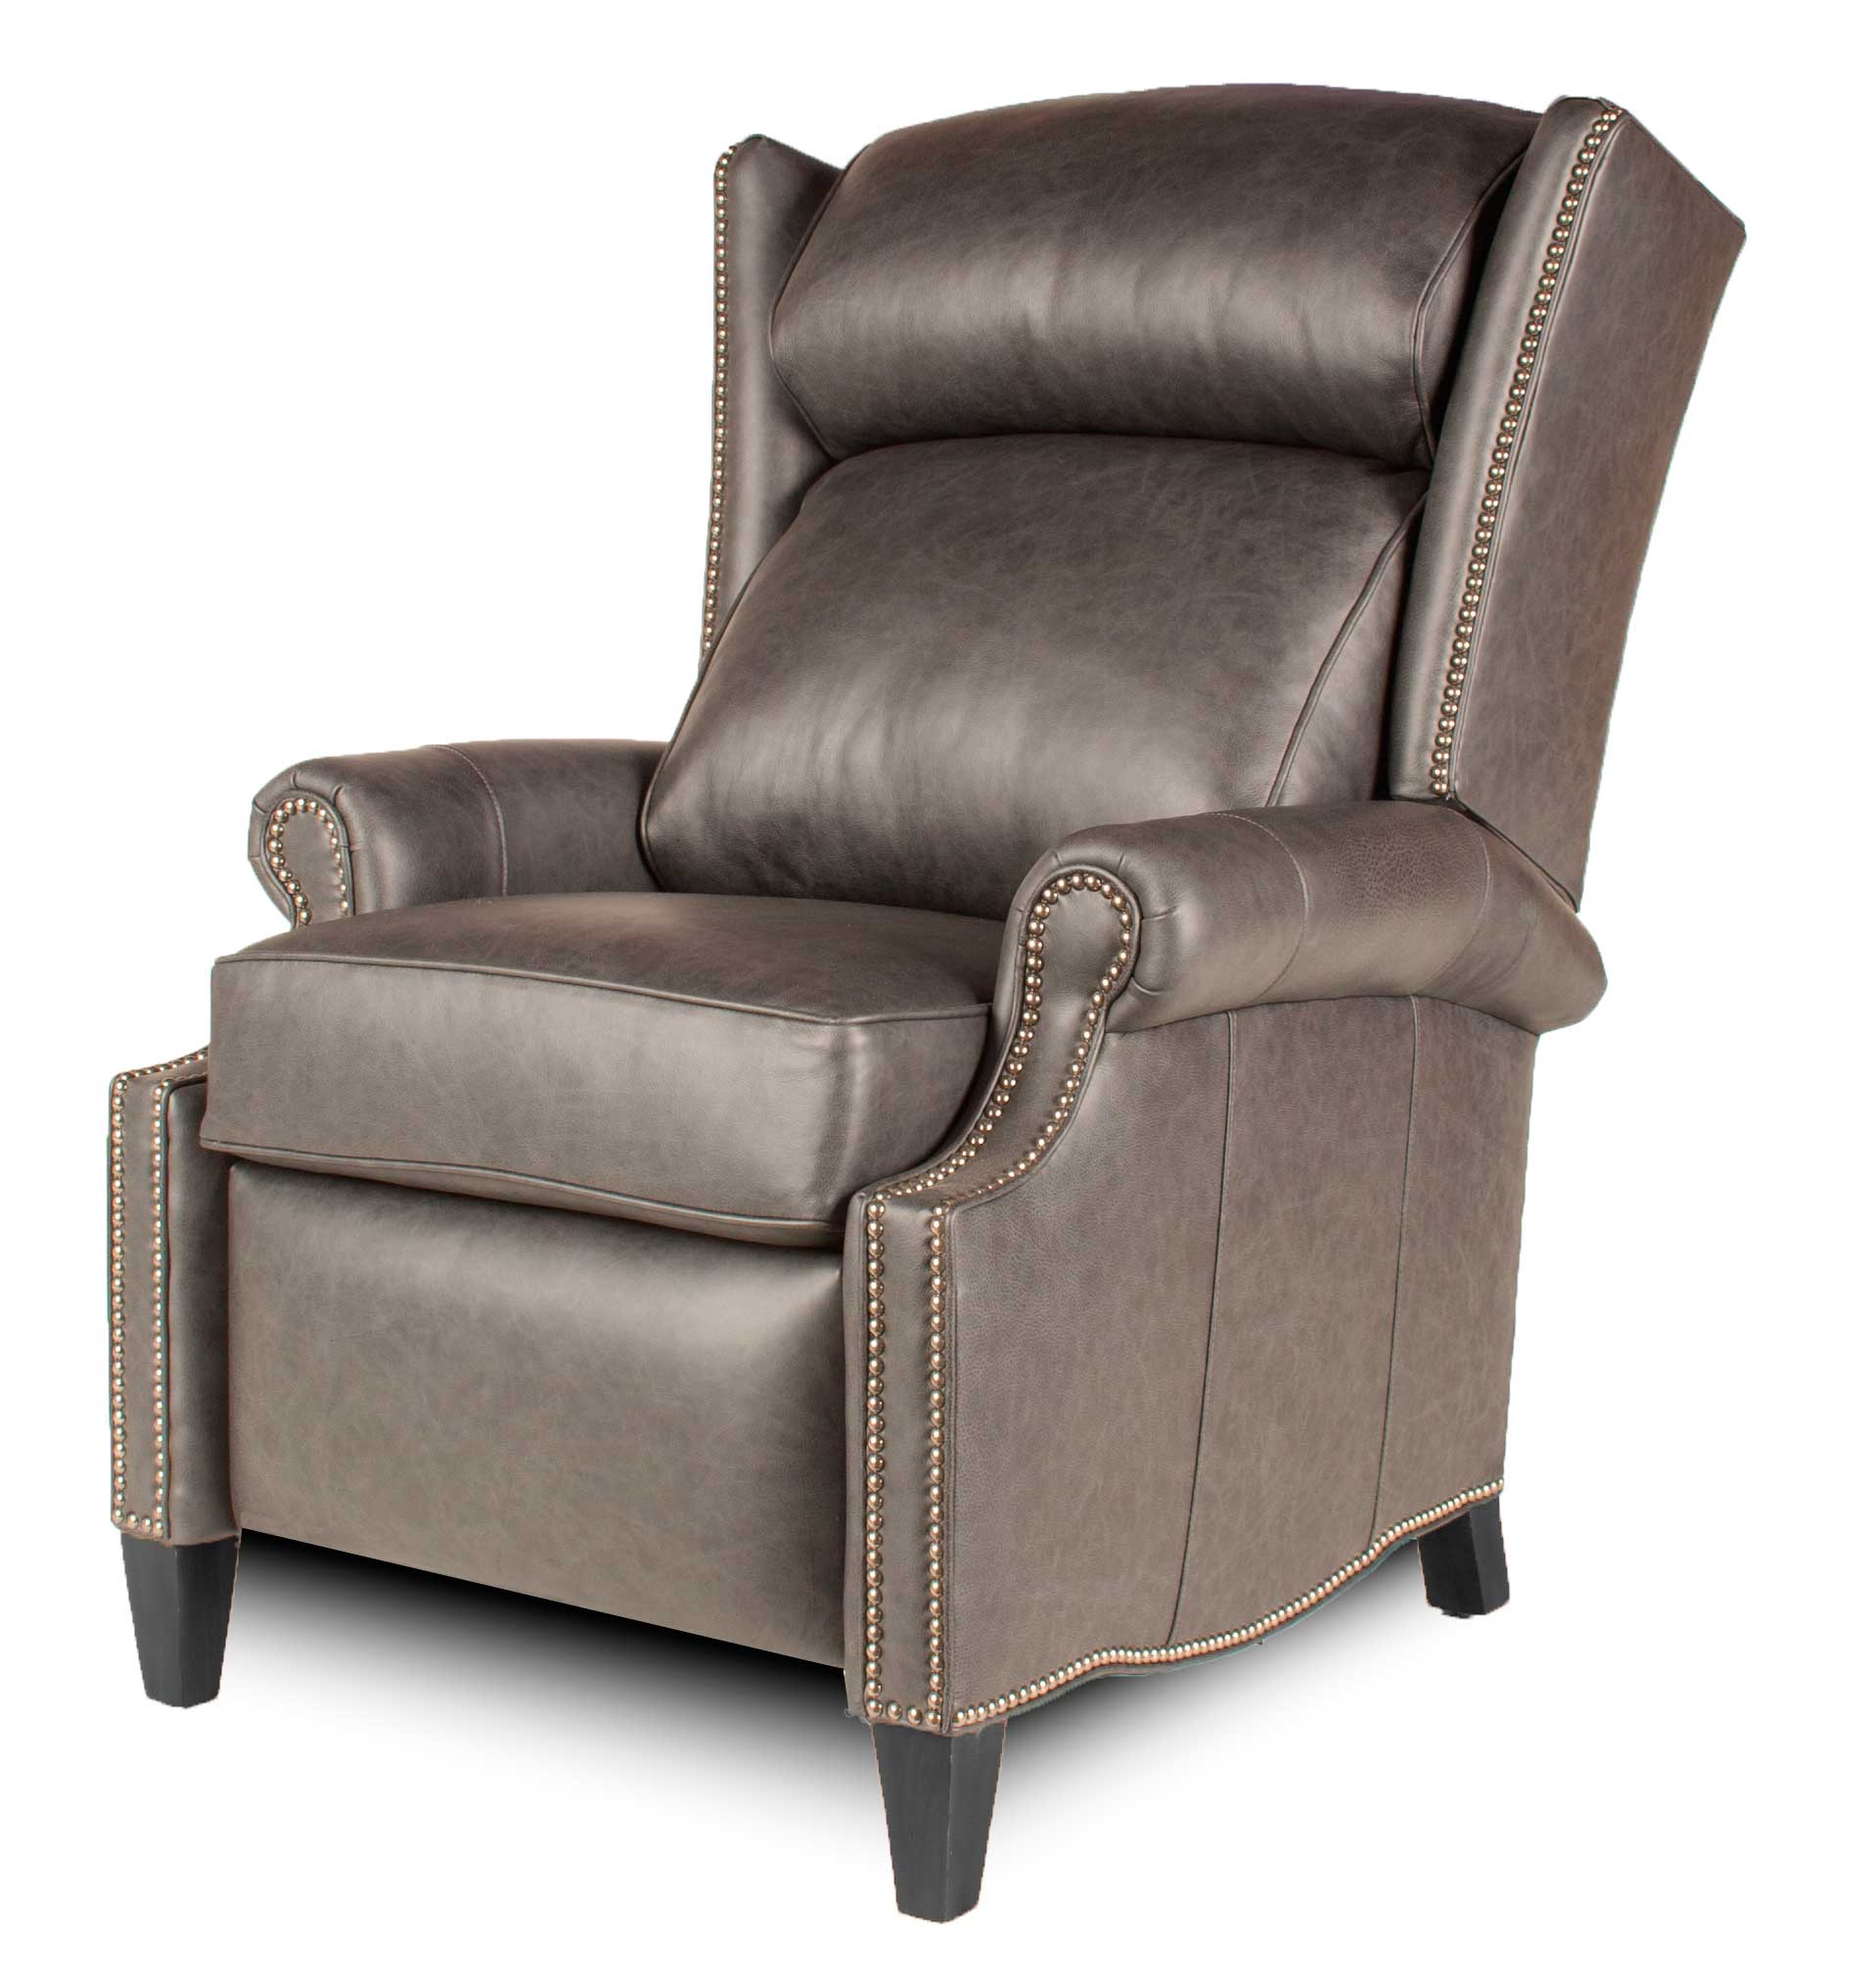 Calvin - Grey Leather Recliner - Angled Closed